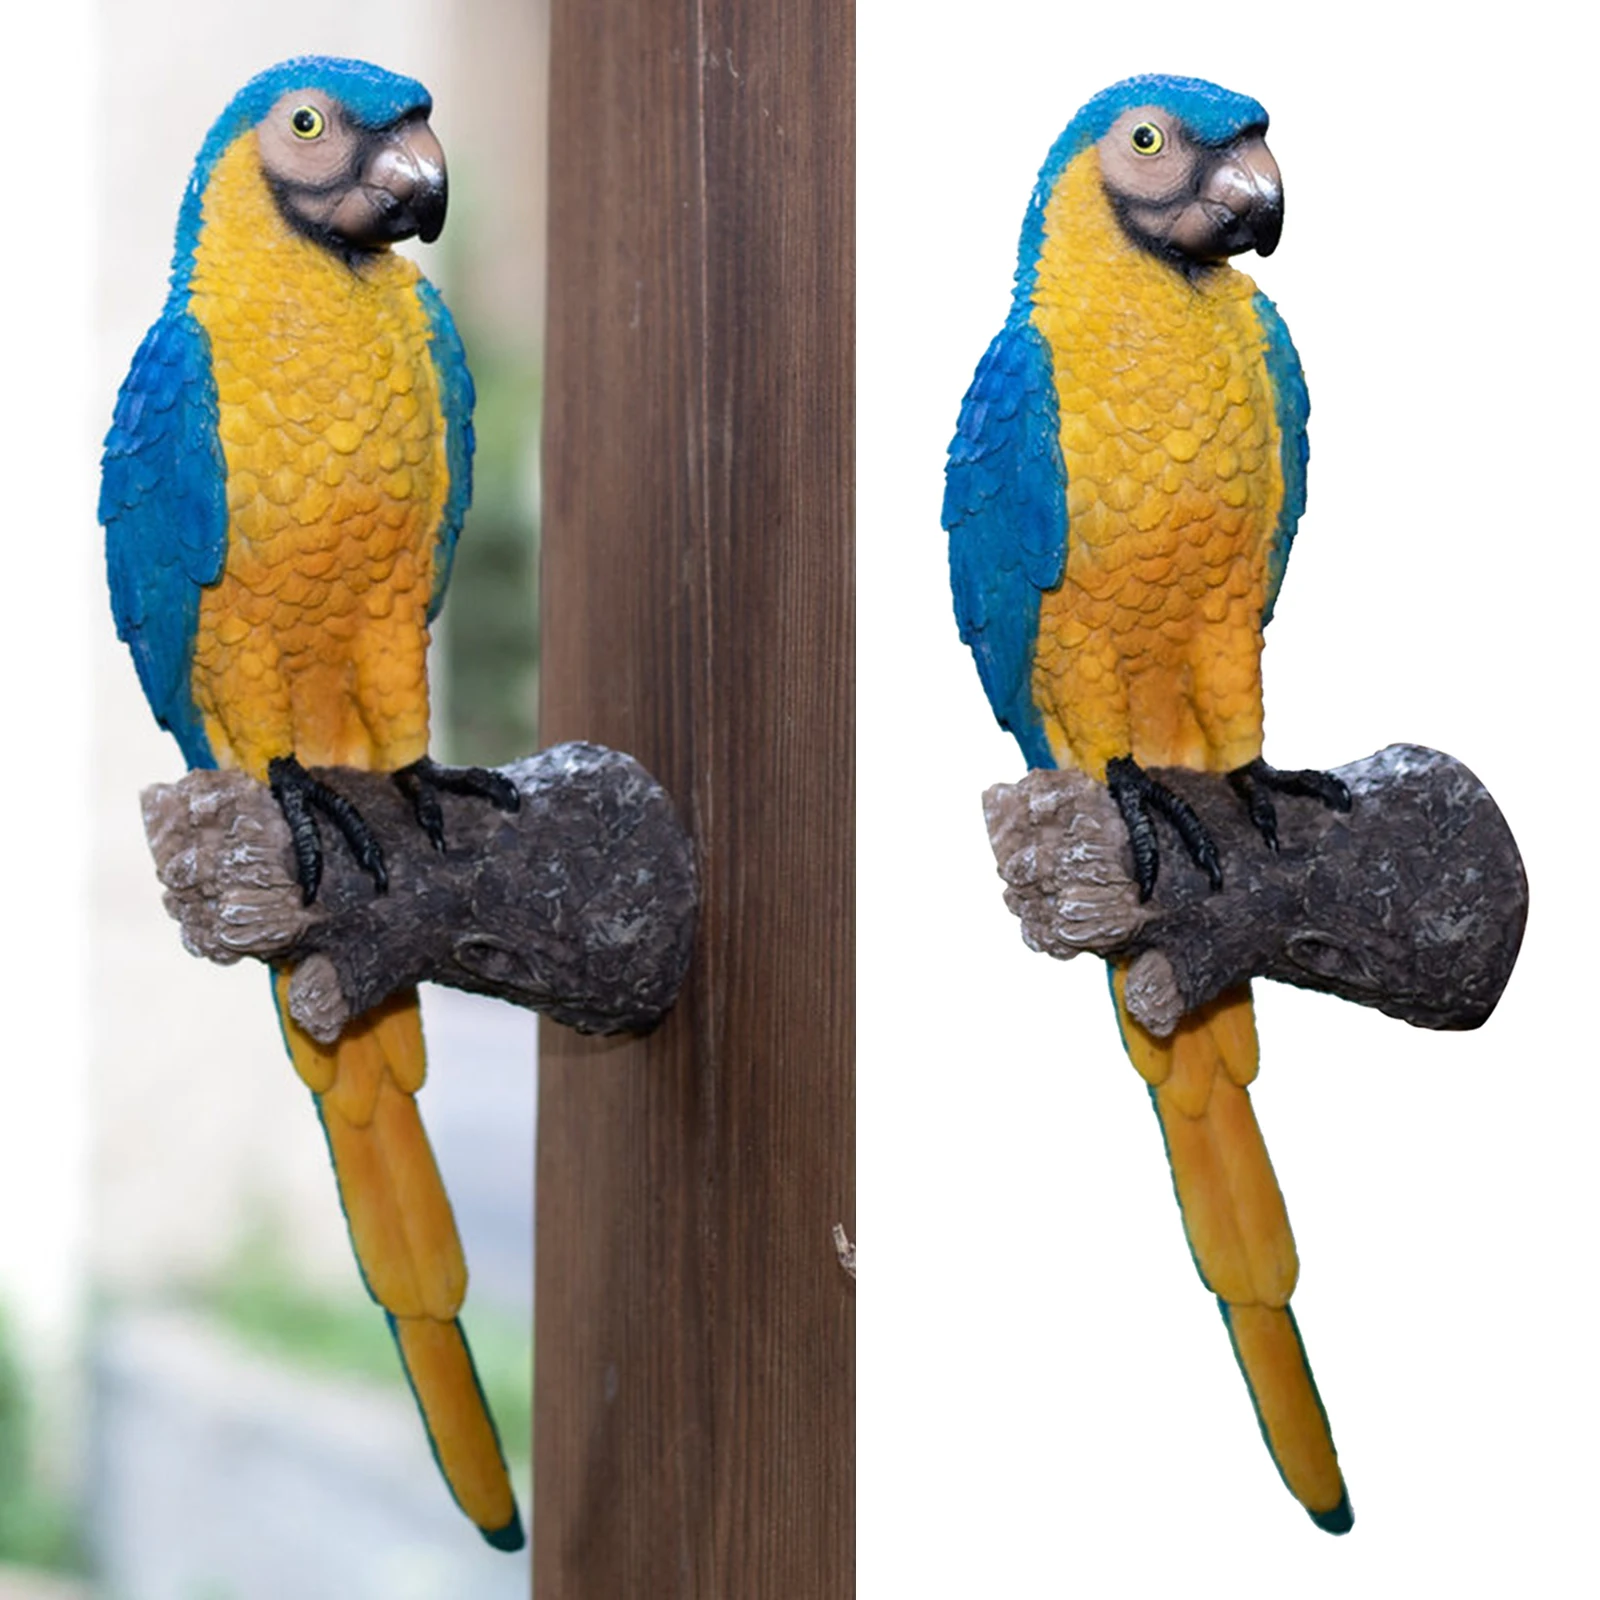 Garden Parrot Statue Yard Handpainted Macaws Wall Decoration Patio Lawn Ornament Landscape Accessories Nature Lovers Gifts